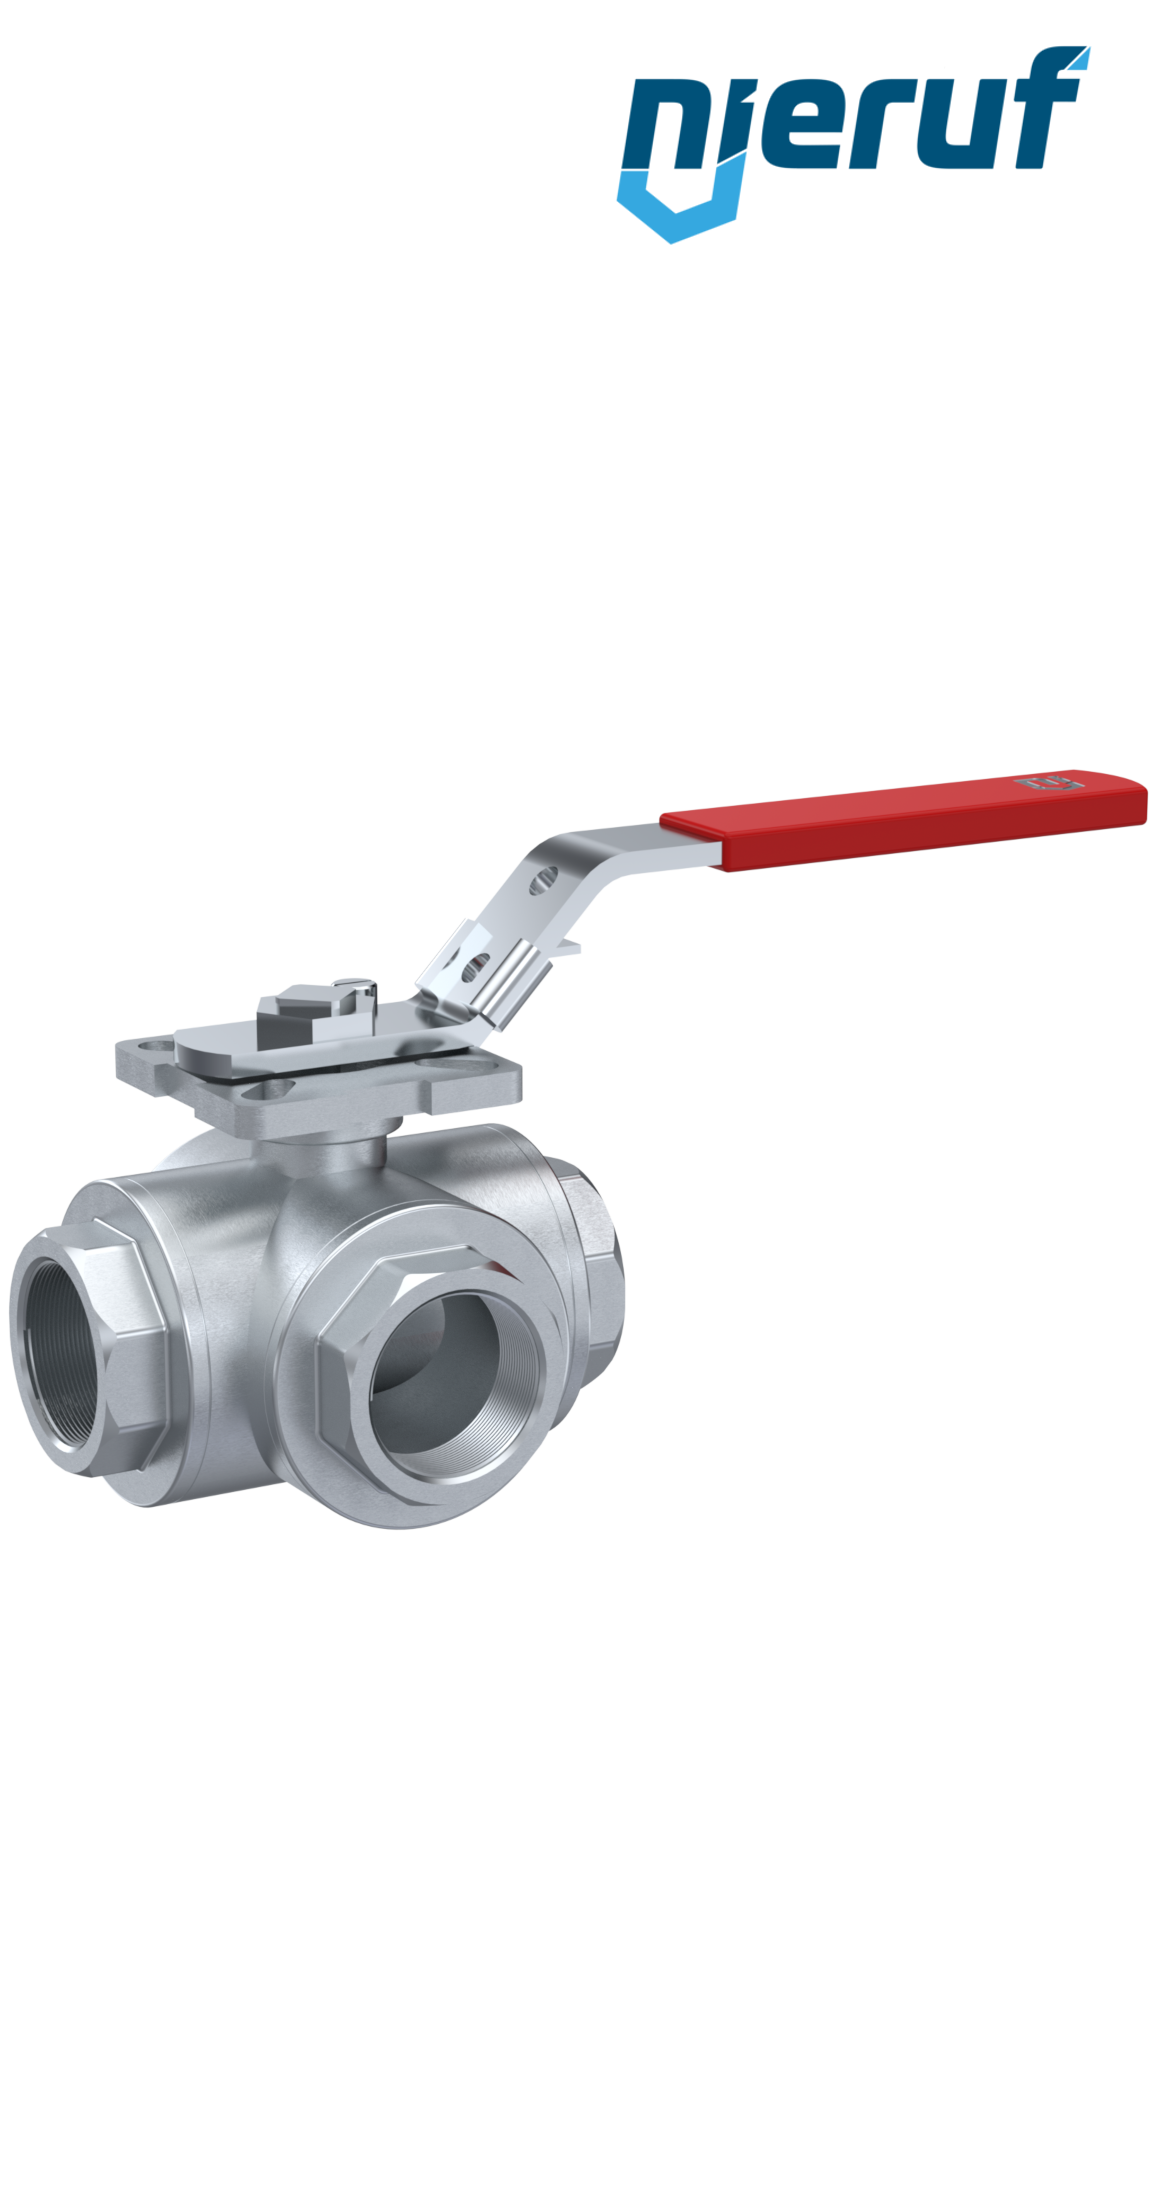 3-way ball valve DN50 - 2" inch GK09 stainless steel L drilling